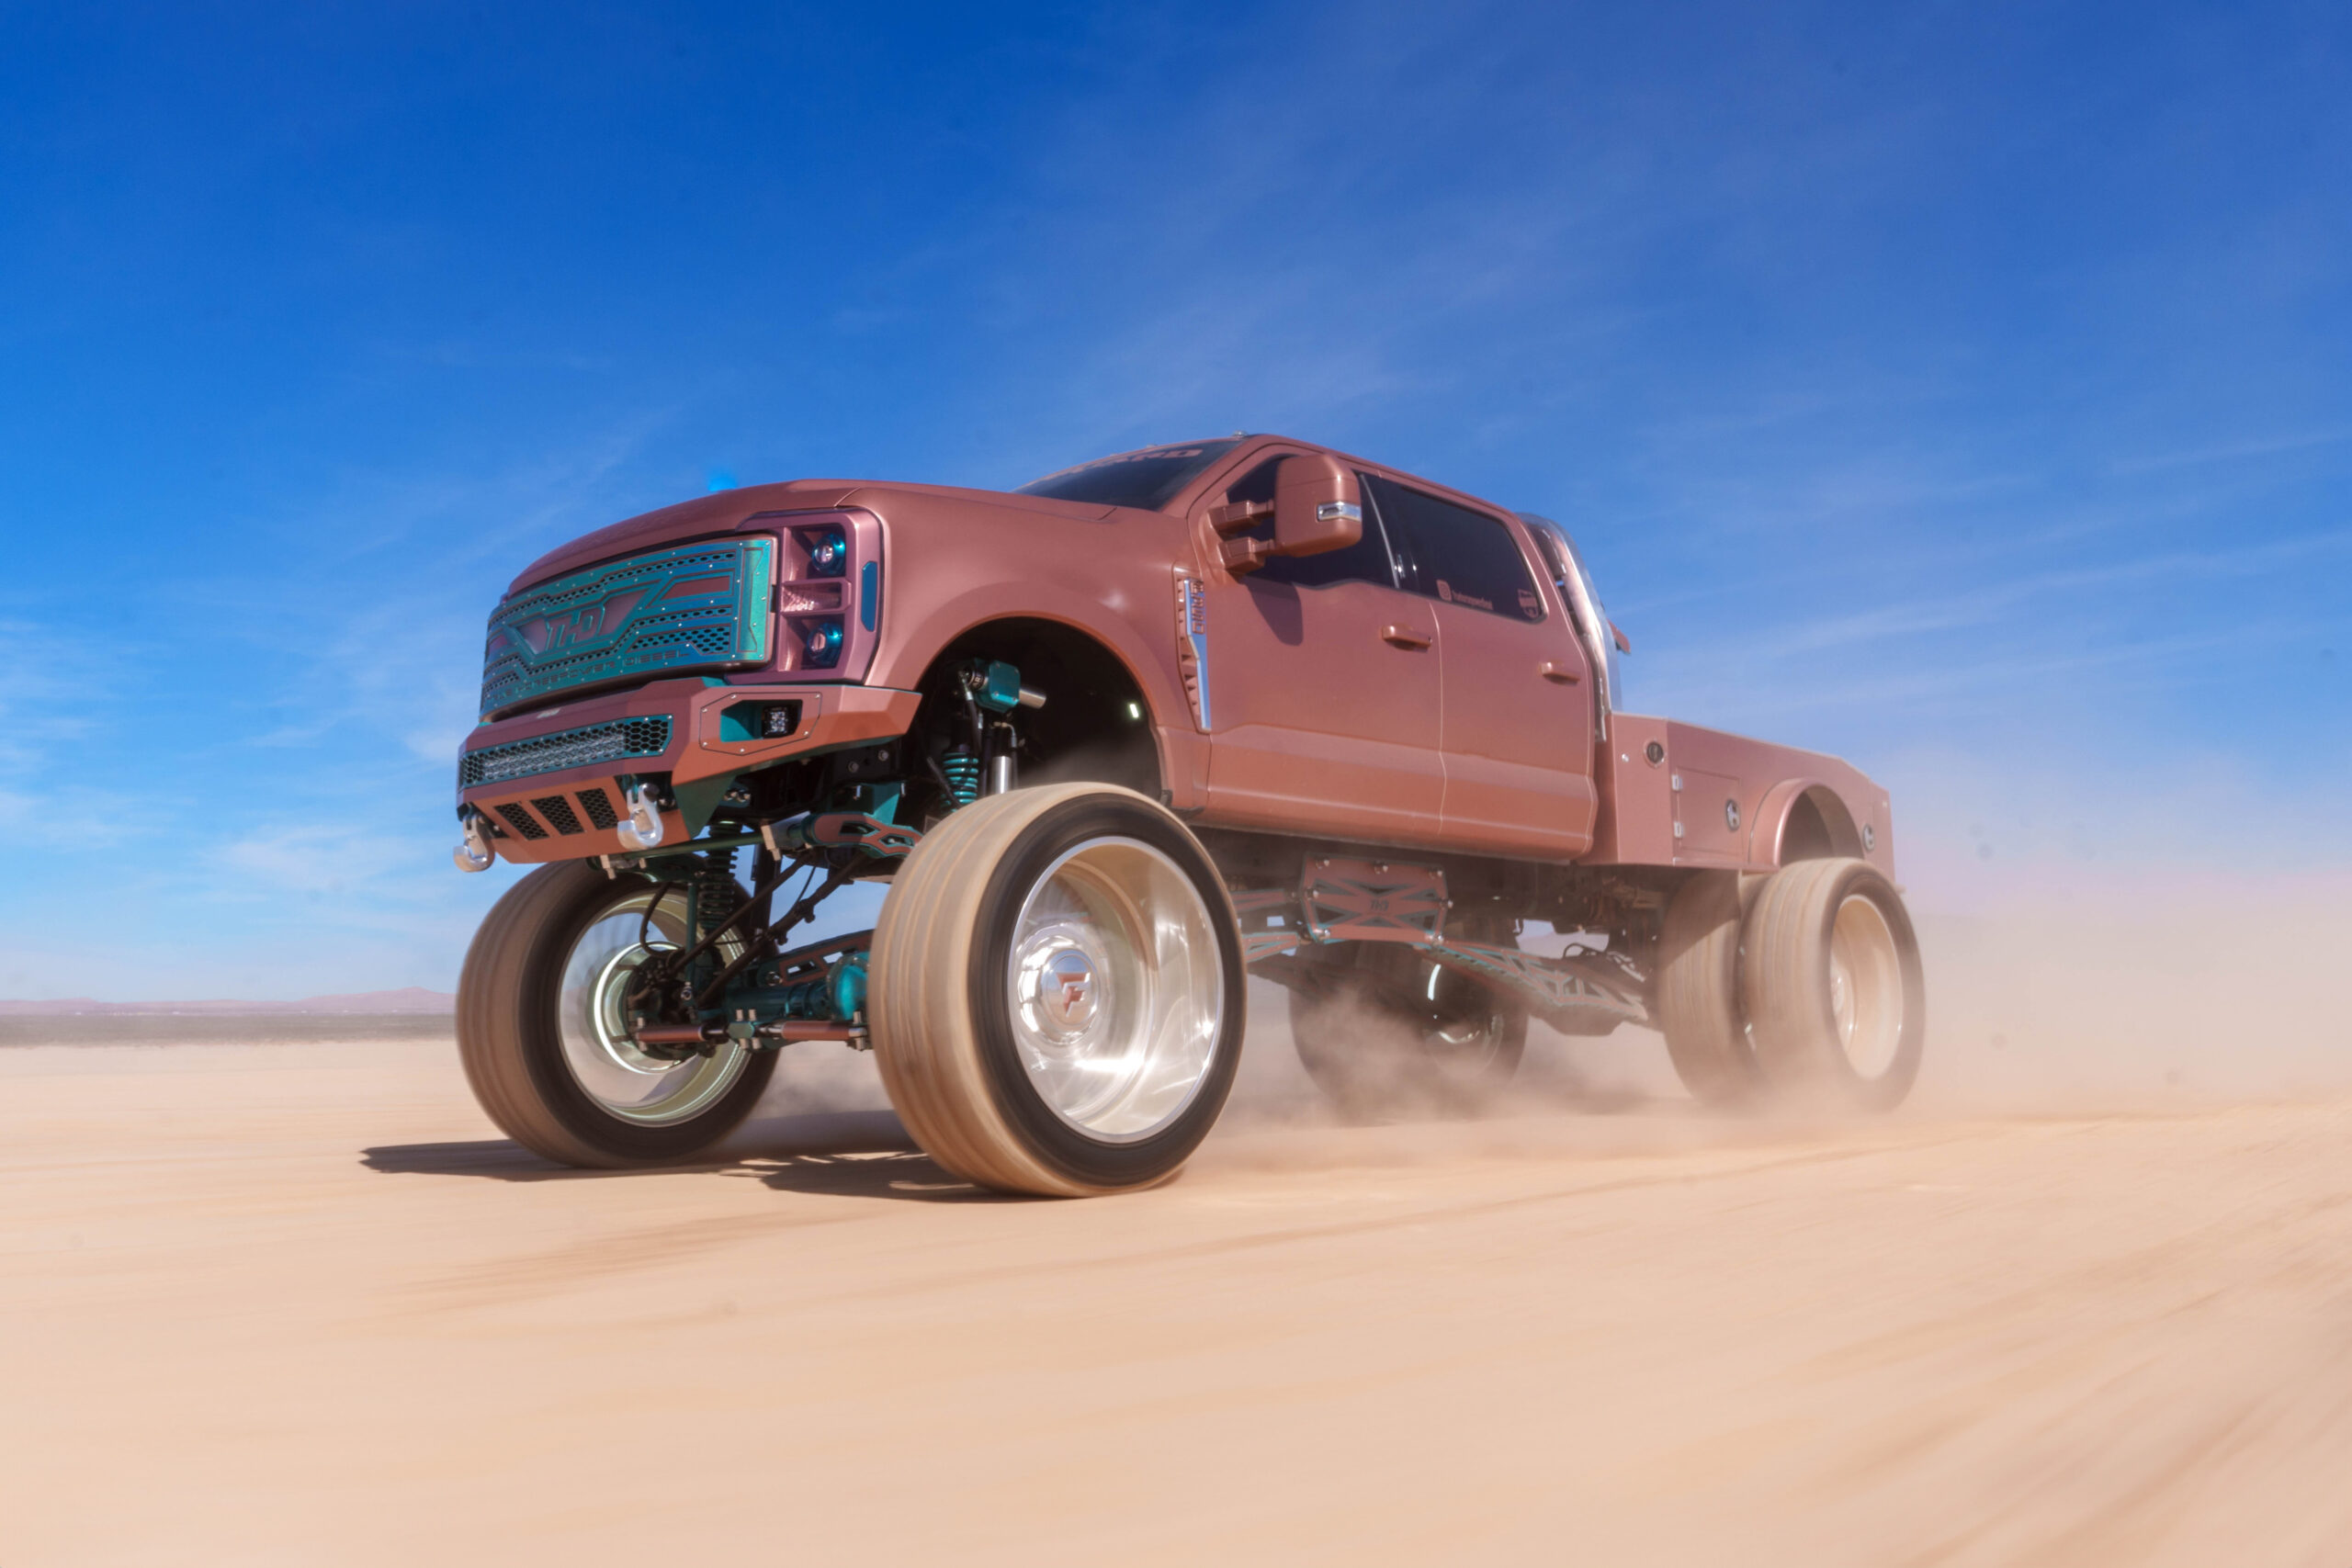 FORD F350 DUALLY